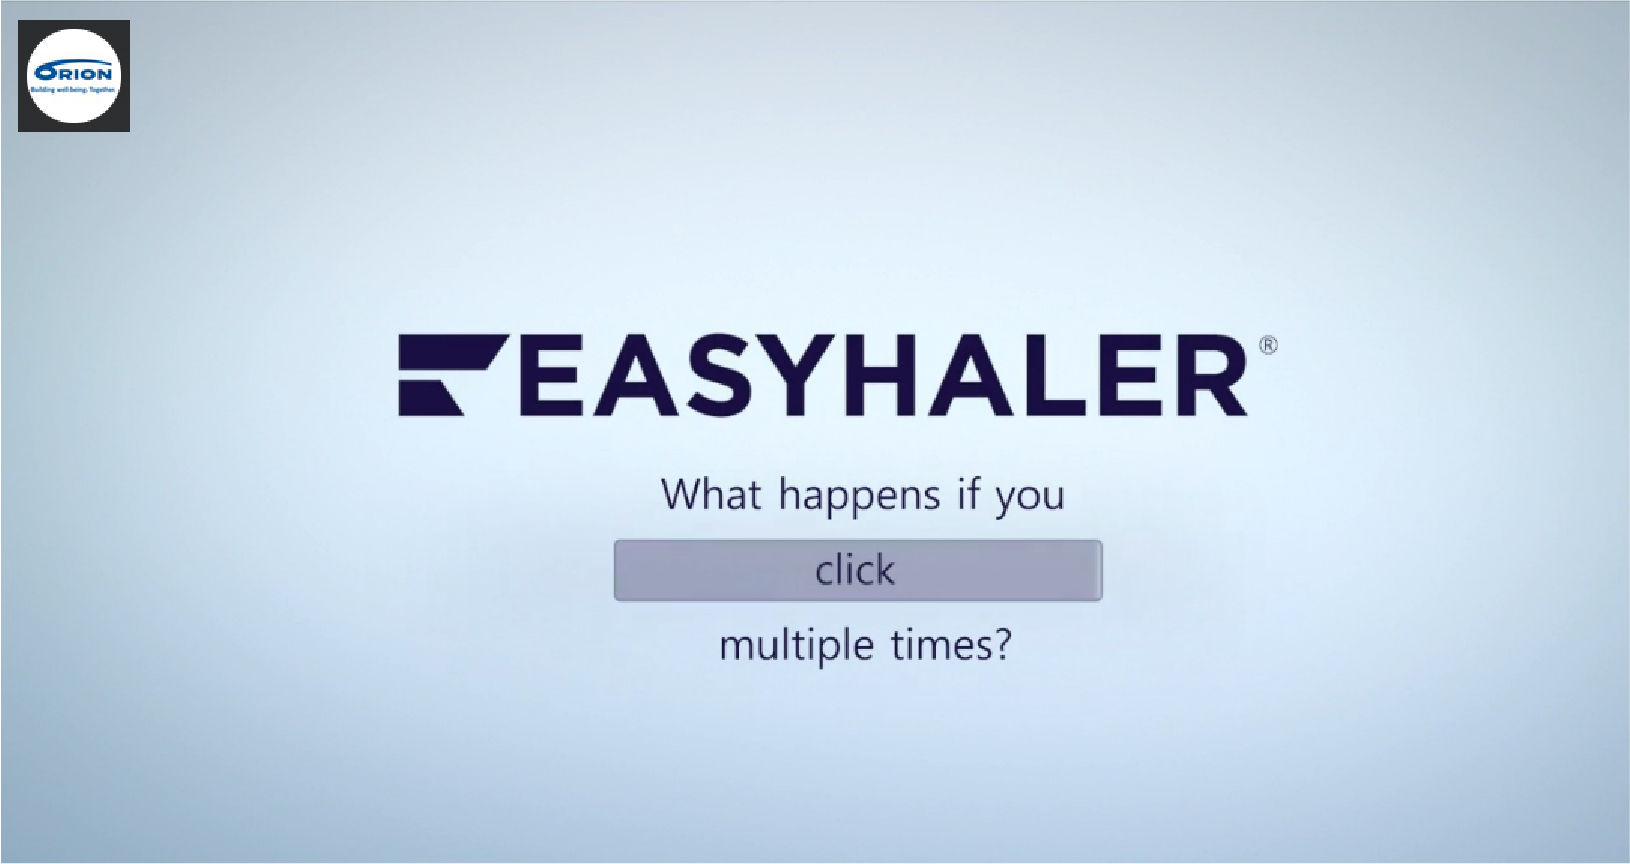 Video: Easyhaler®: When you click more than once